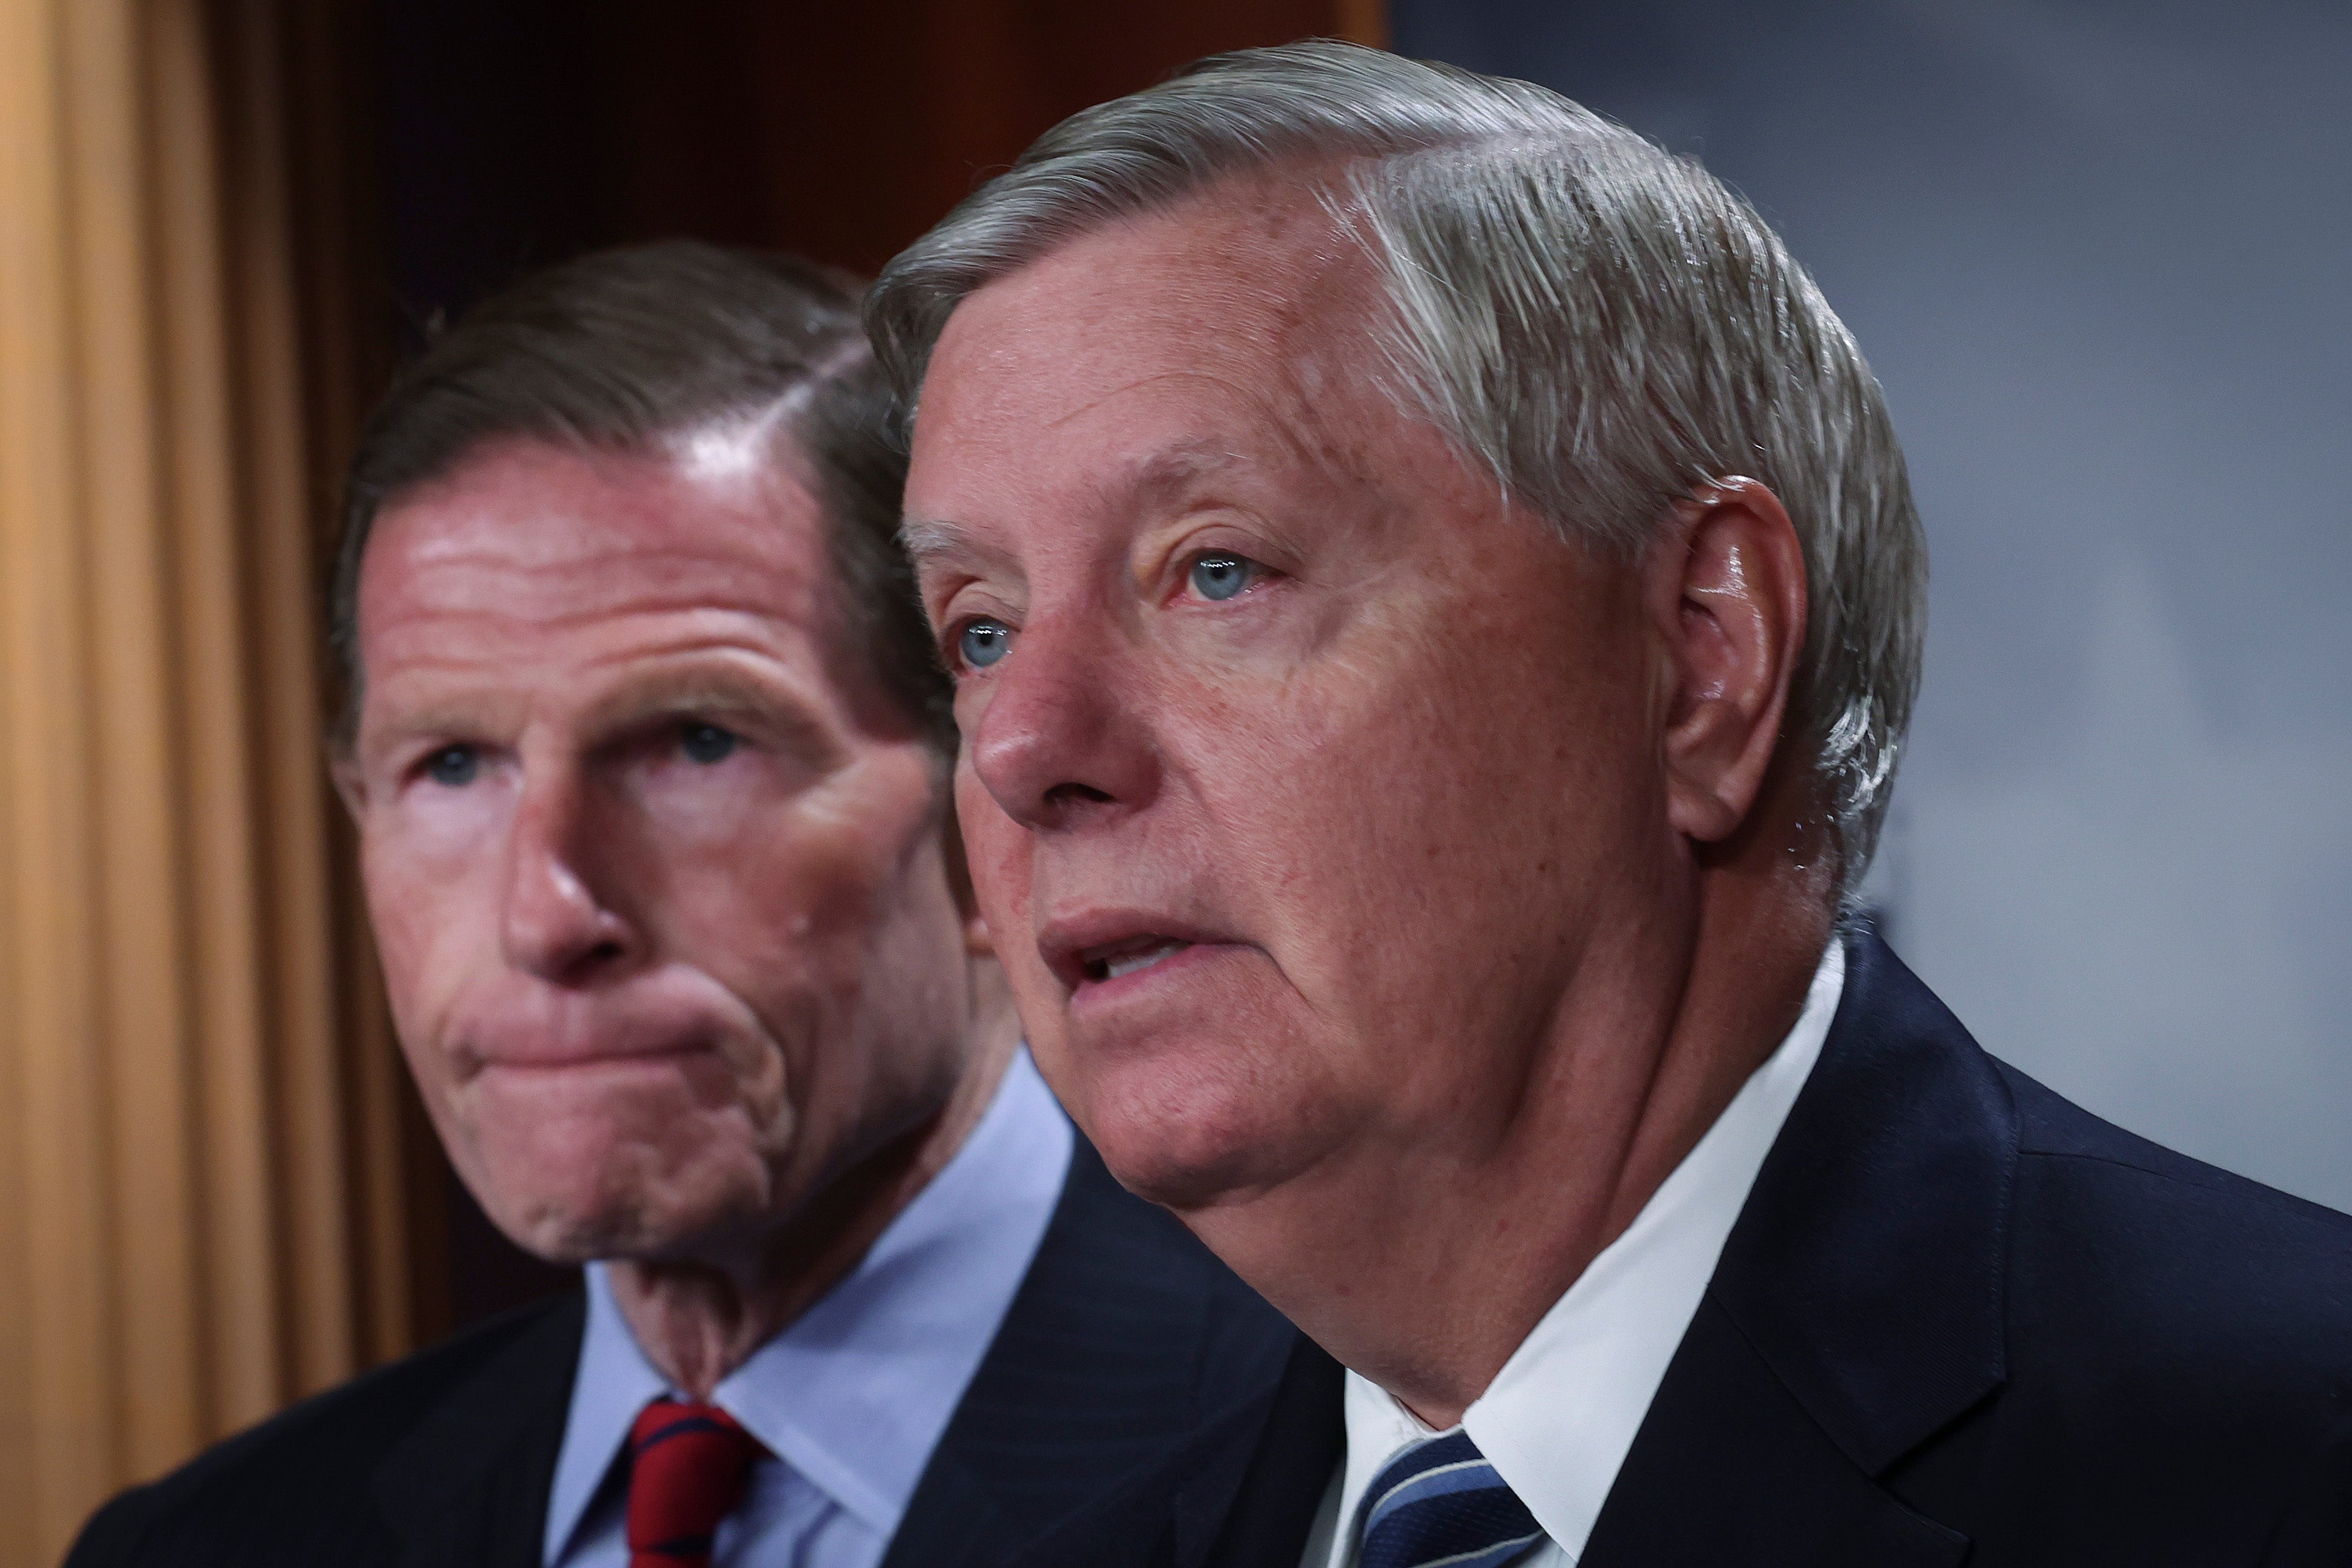 Graham, Blumenthal call for Russia to join list of state sponsors of terrorism, say crimes are 'genocide'